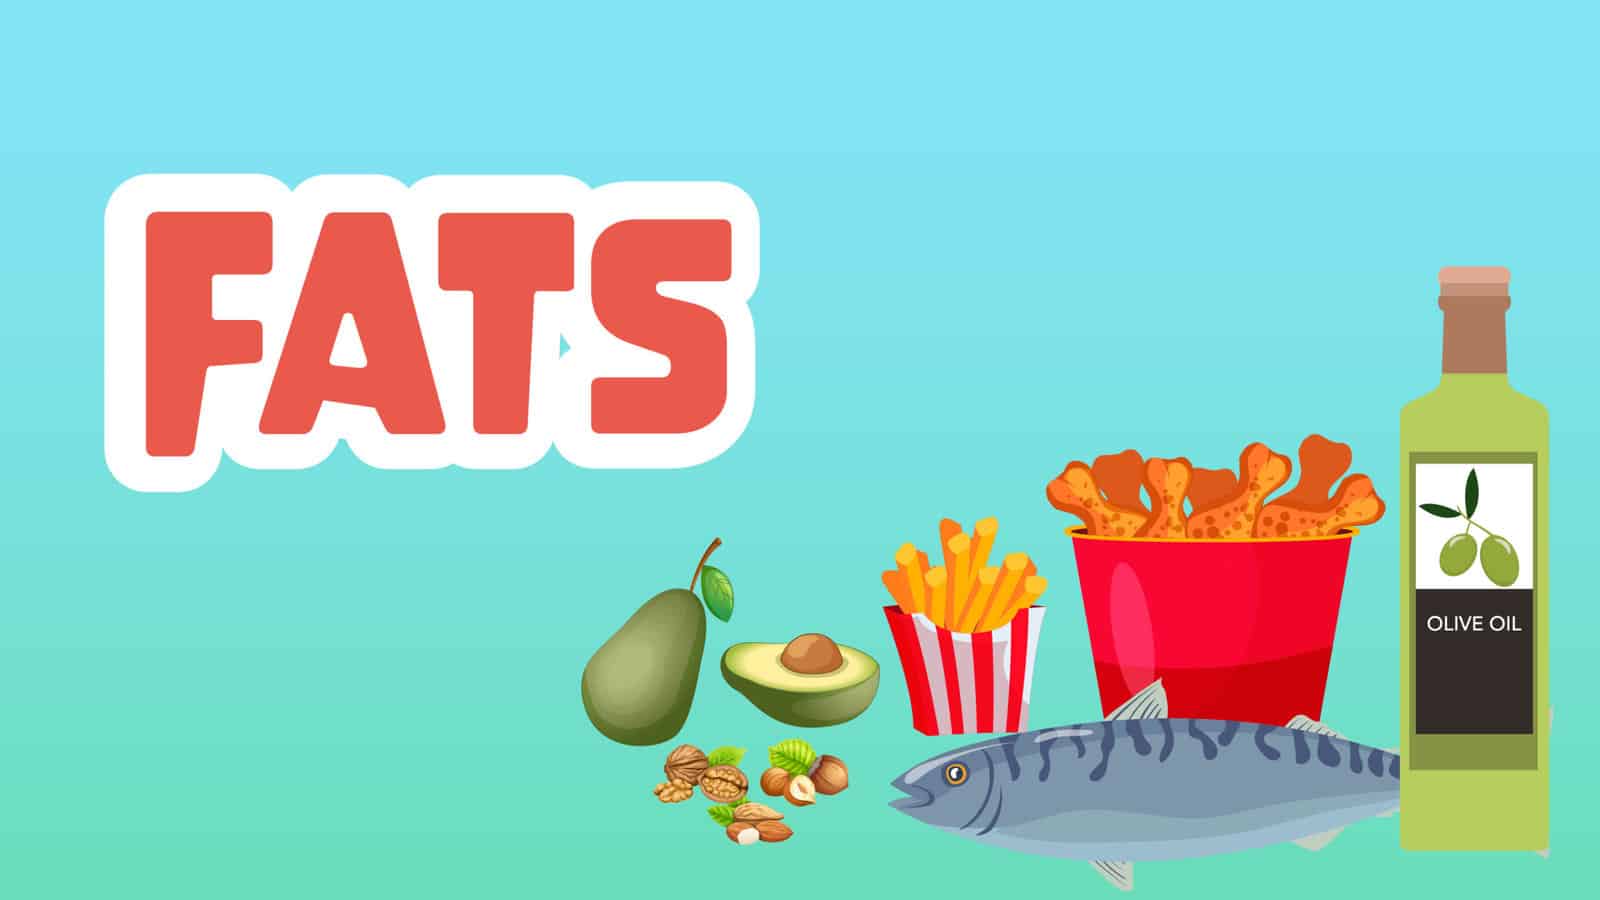 Fats Facts for Kids – 5 Focused Facts about Fats